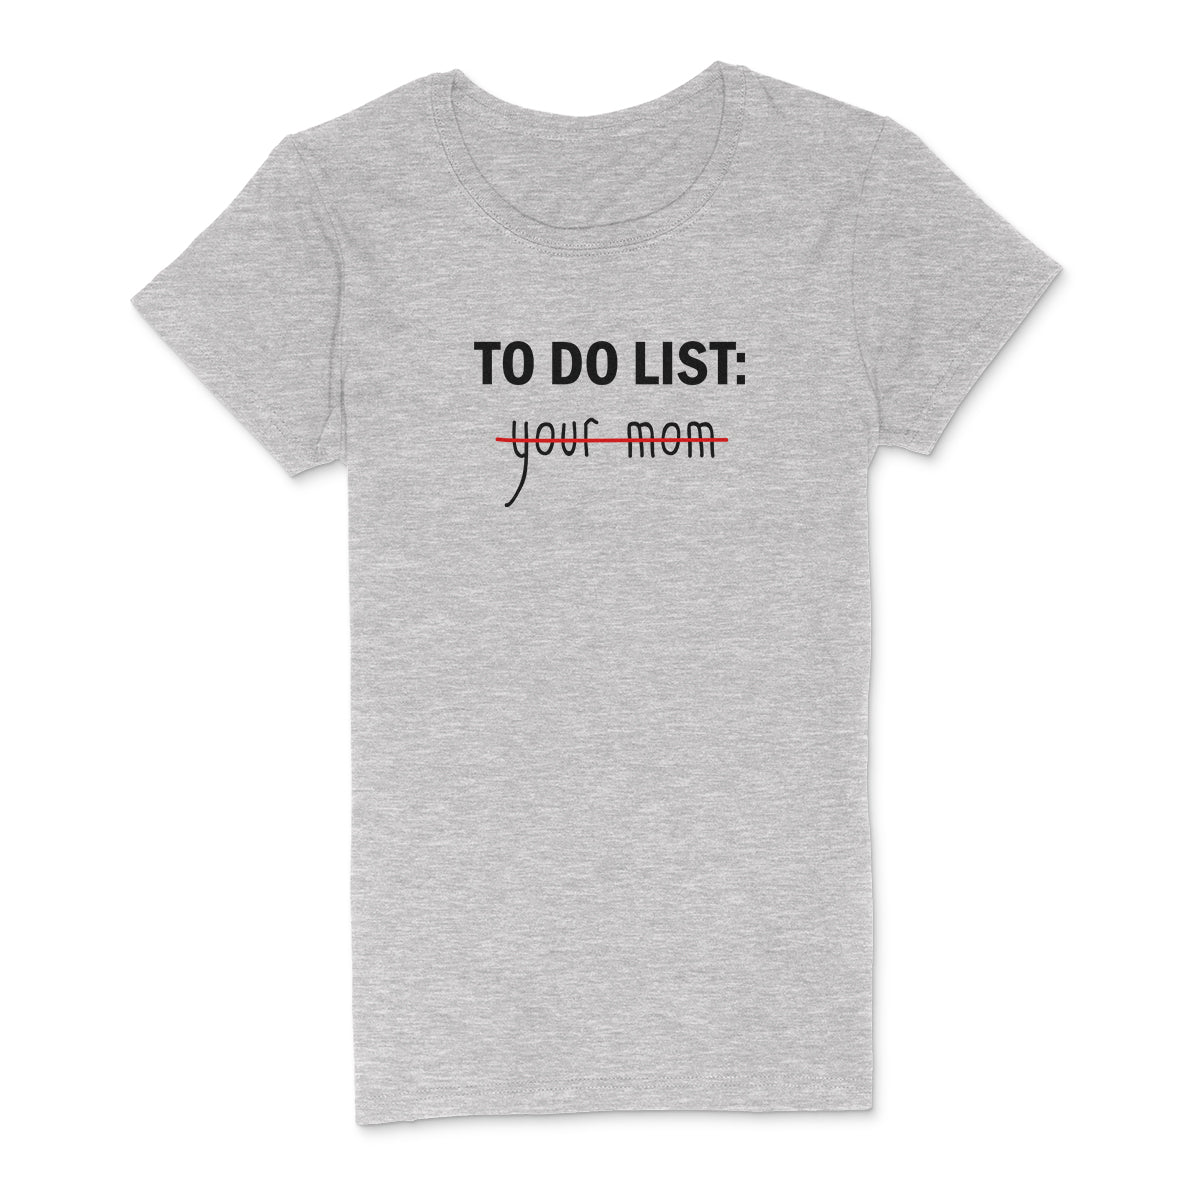 "To Do, Your Mom" Premium Midweight Ringspun Cotton T-Shirt - Mens/Womens Fits